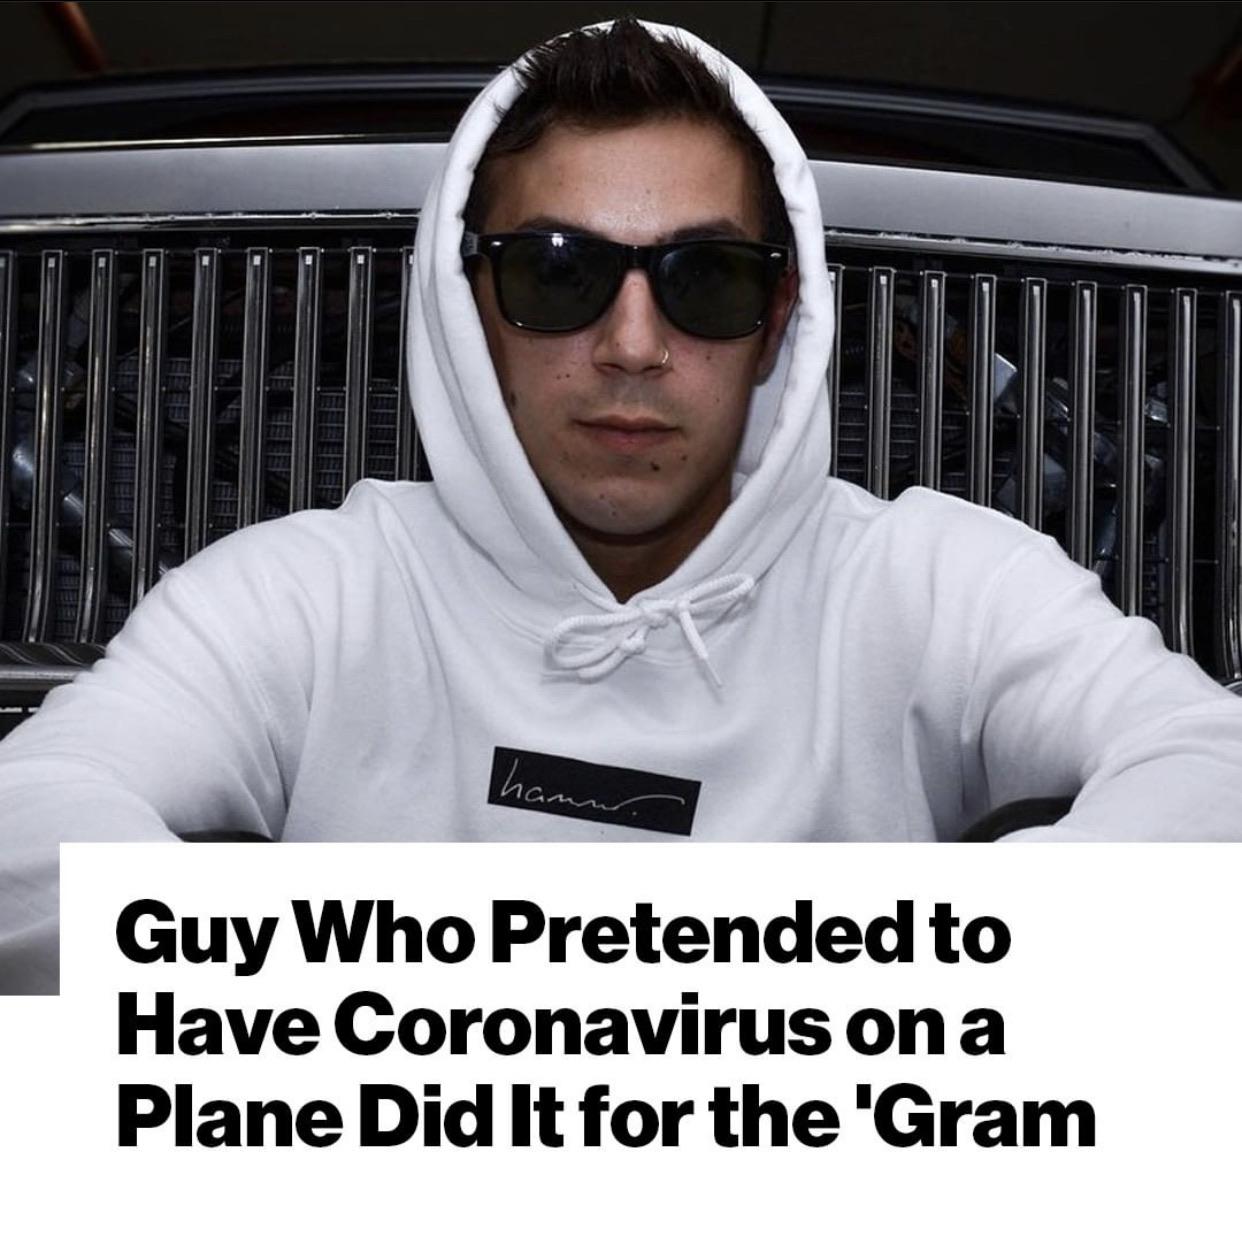 photo caption - ham Guy Who Pretended to Have Coronavirus on a Plane Did It for the 'Gram